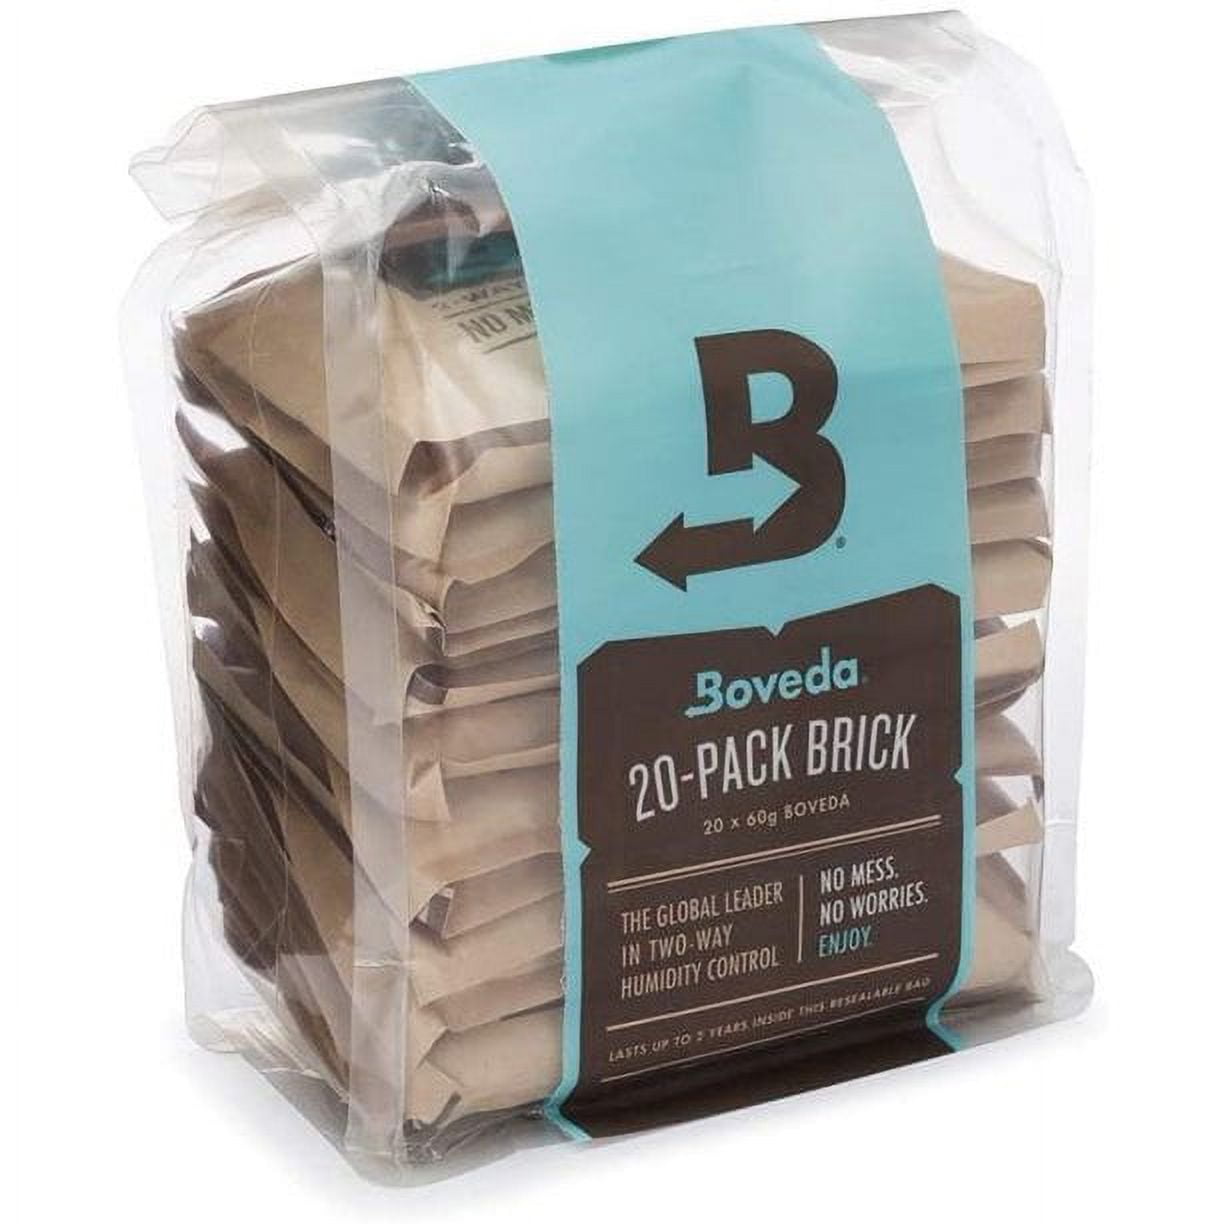 Pack of 6 Humidification Packets for Cigars 69 % Boveda